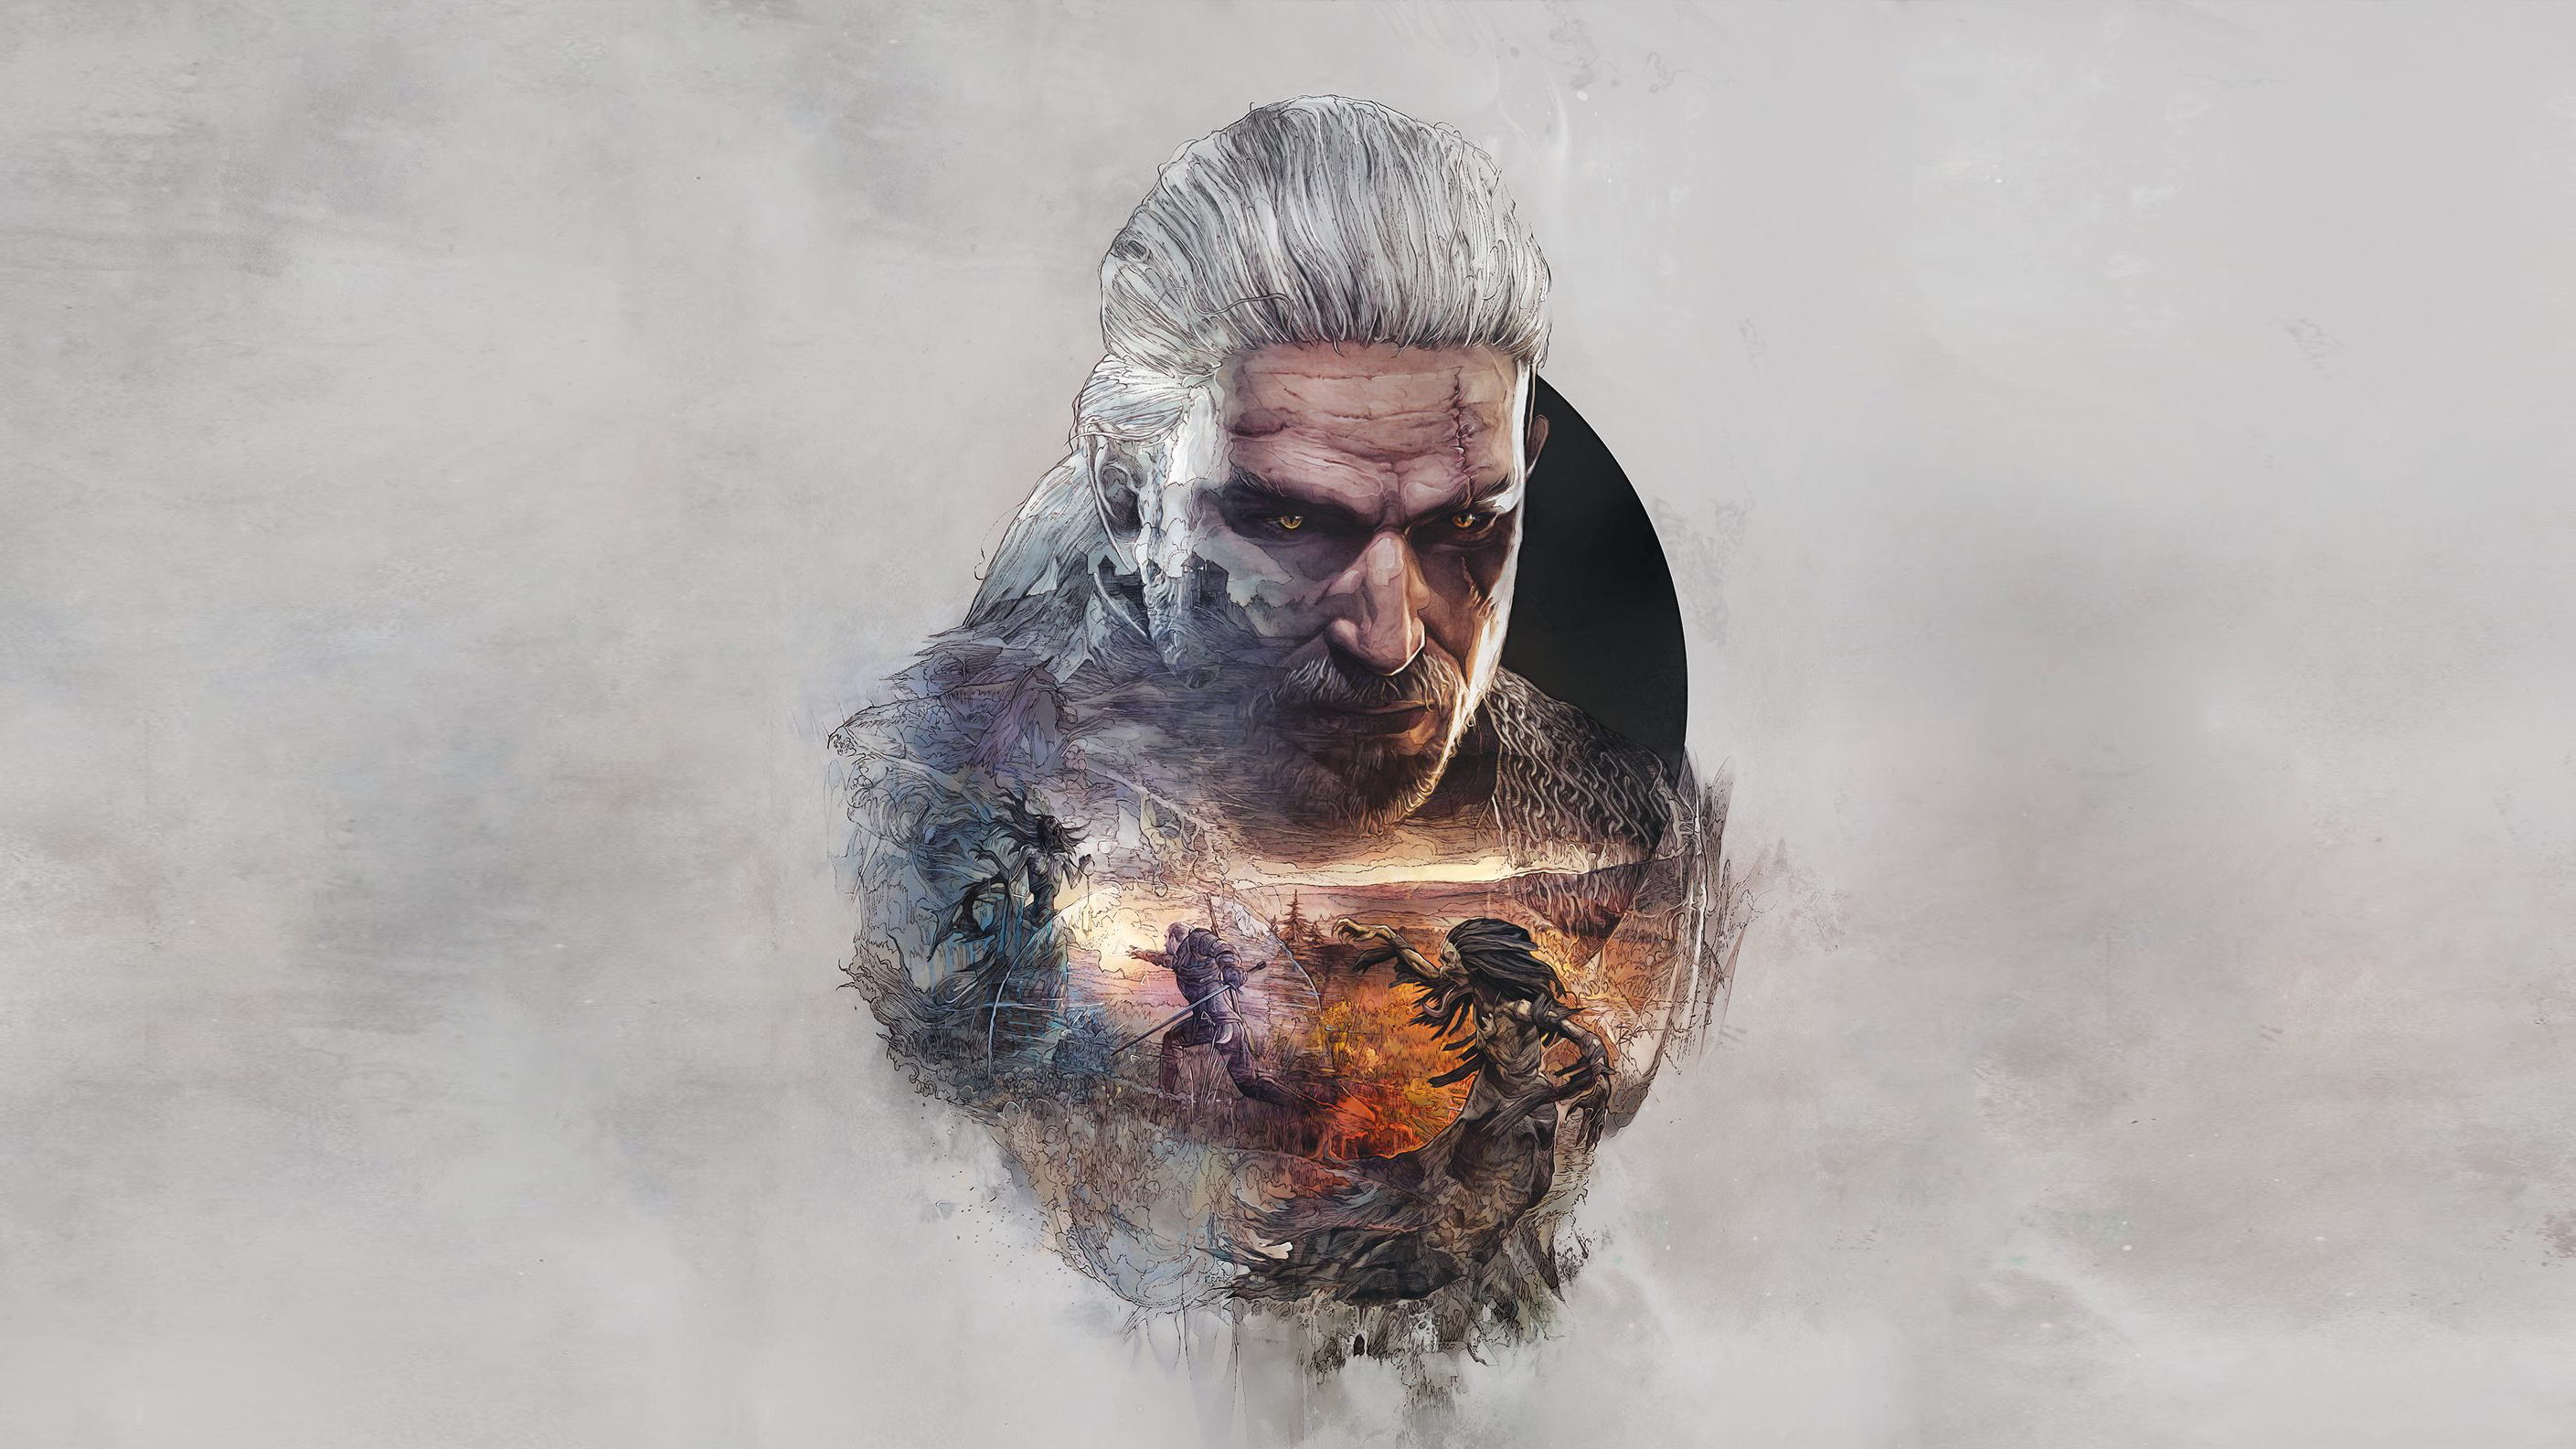 The Witcher 3: Wild Hunt Wallpapers, Pictures, Images